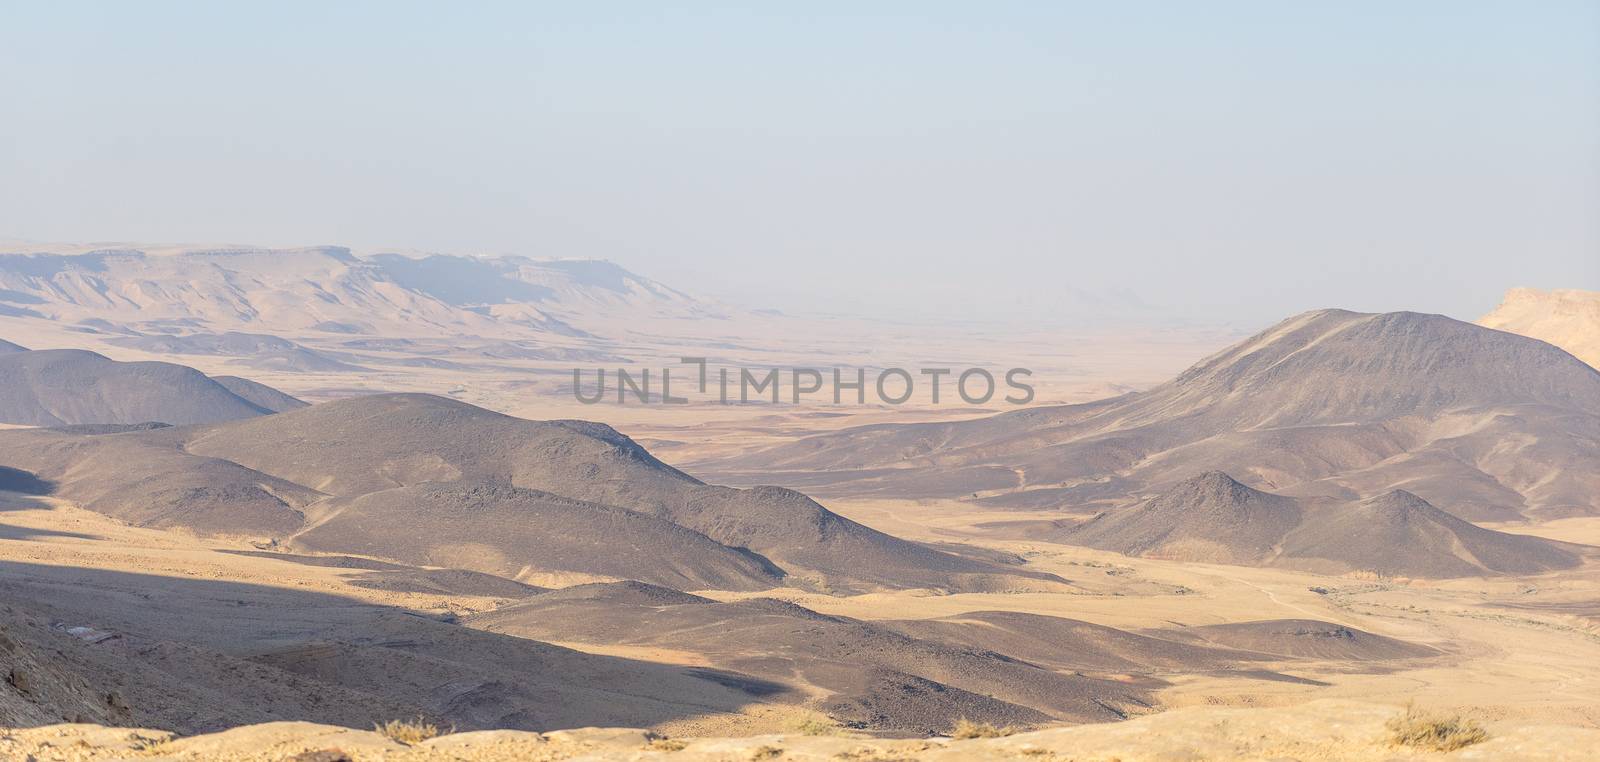 Desert landscape nature tourism and travel by javax